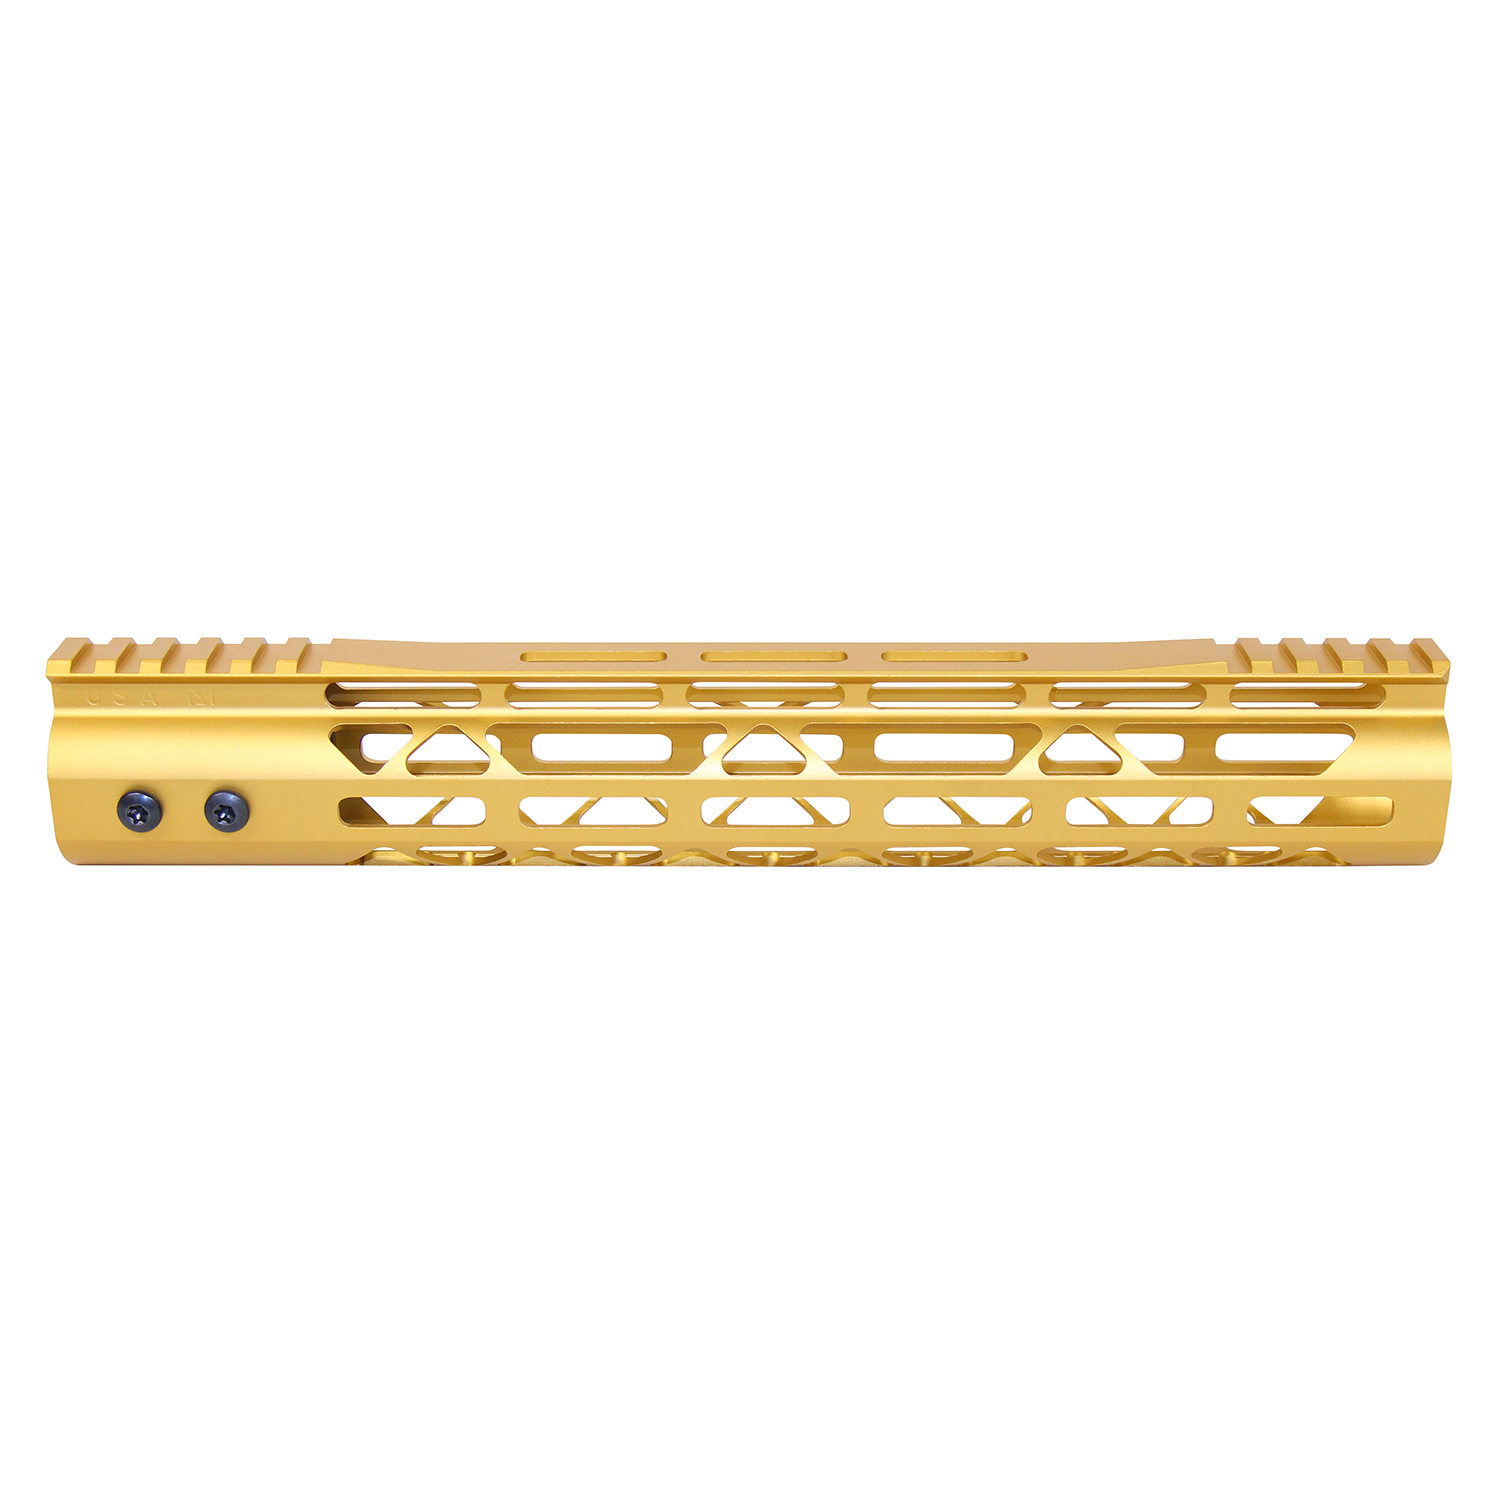 12" MOD LITE Skeletonized  Series M-LOK Free Floating Handguard With Monolithic Top Rail (Anodized Gold)